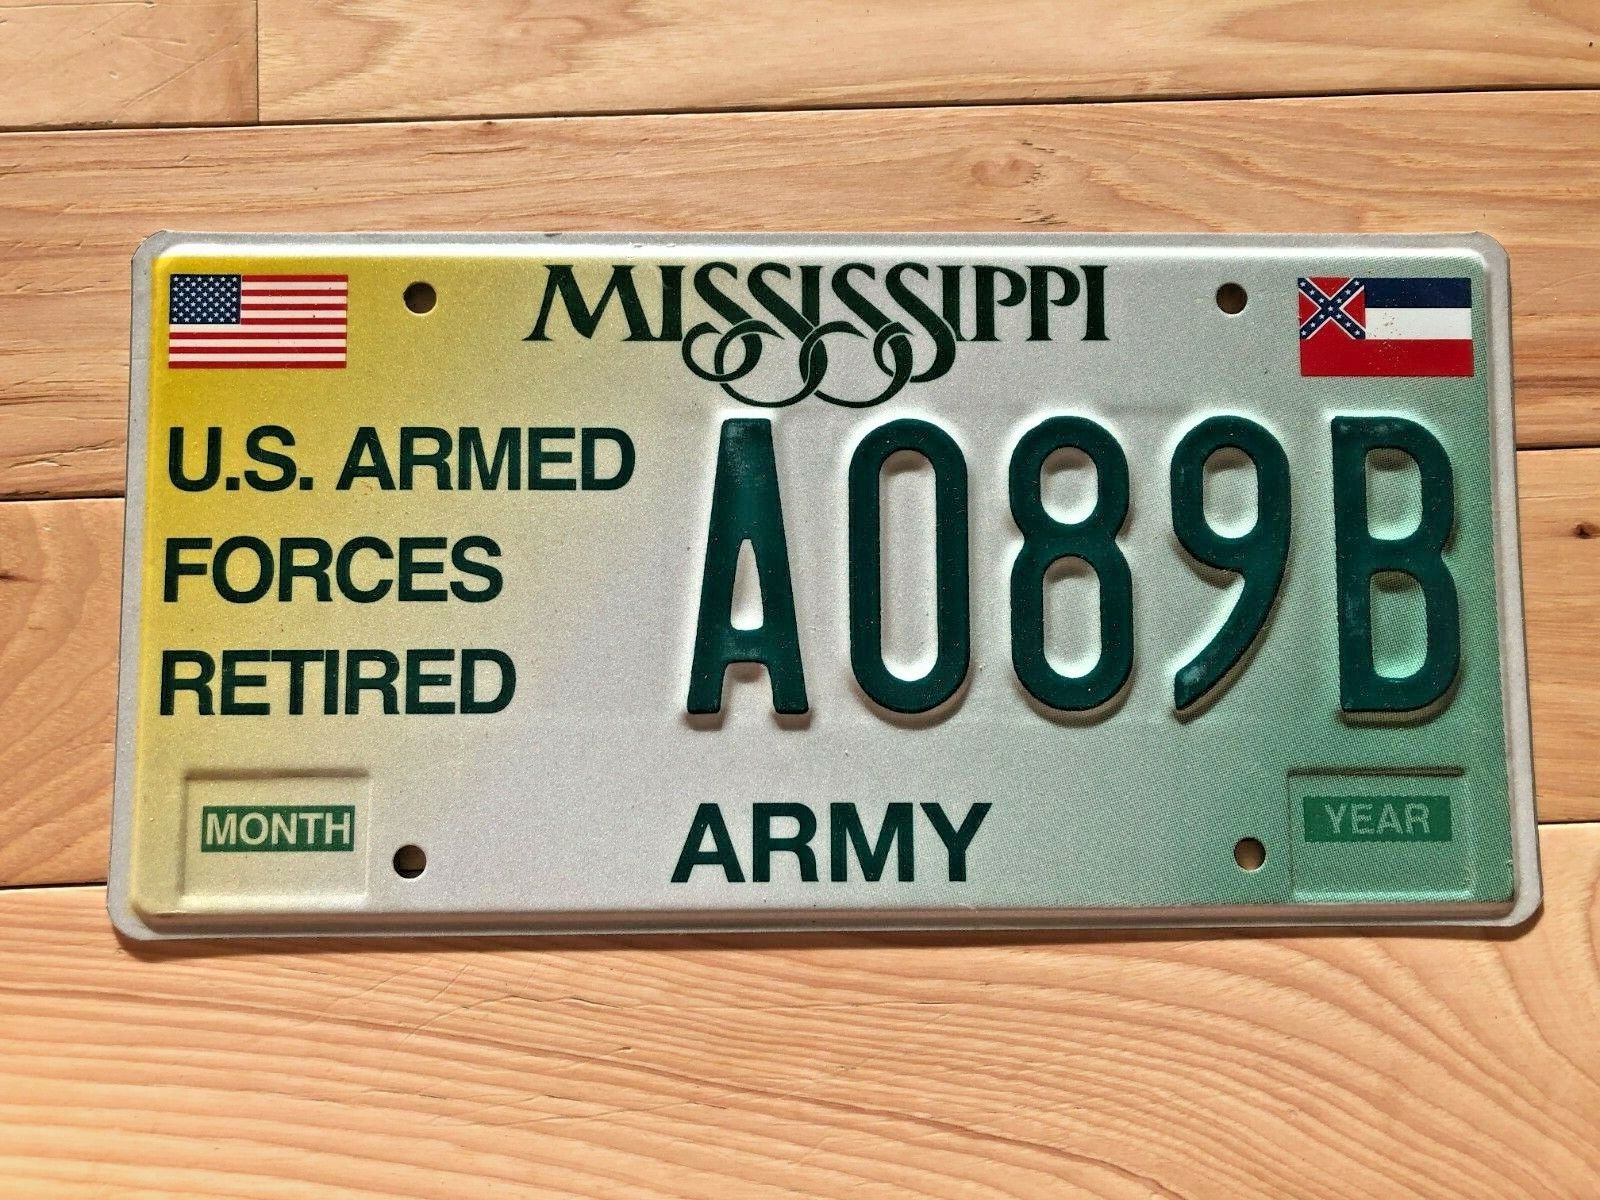 Mississippi US Armed Forces Retired Army License Plate